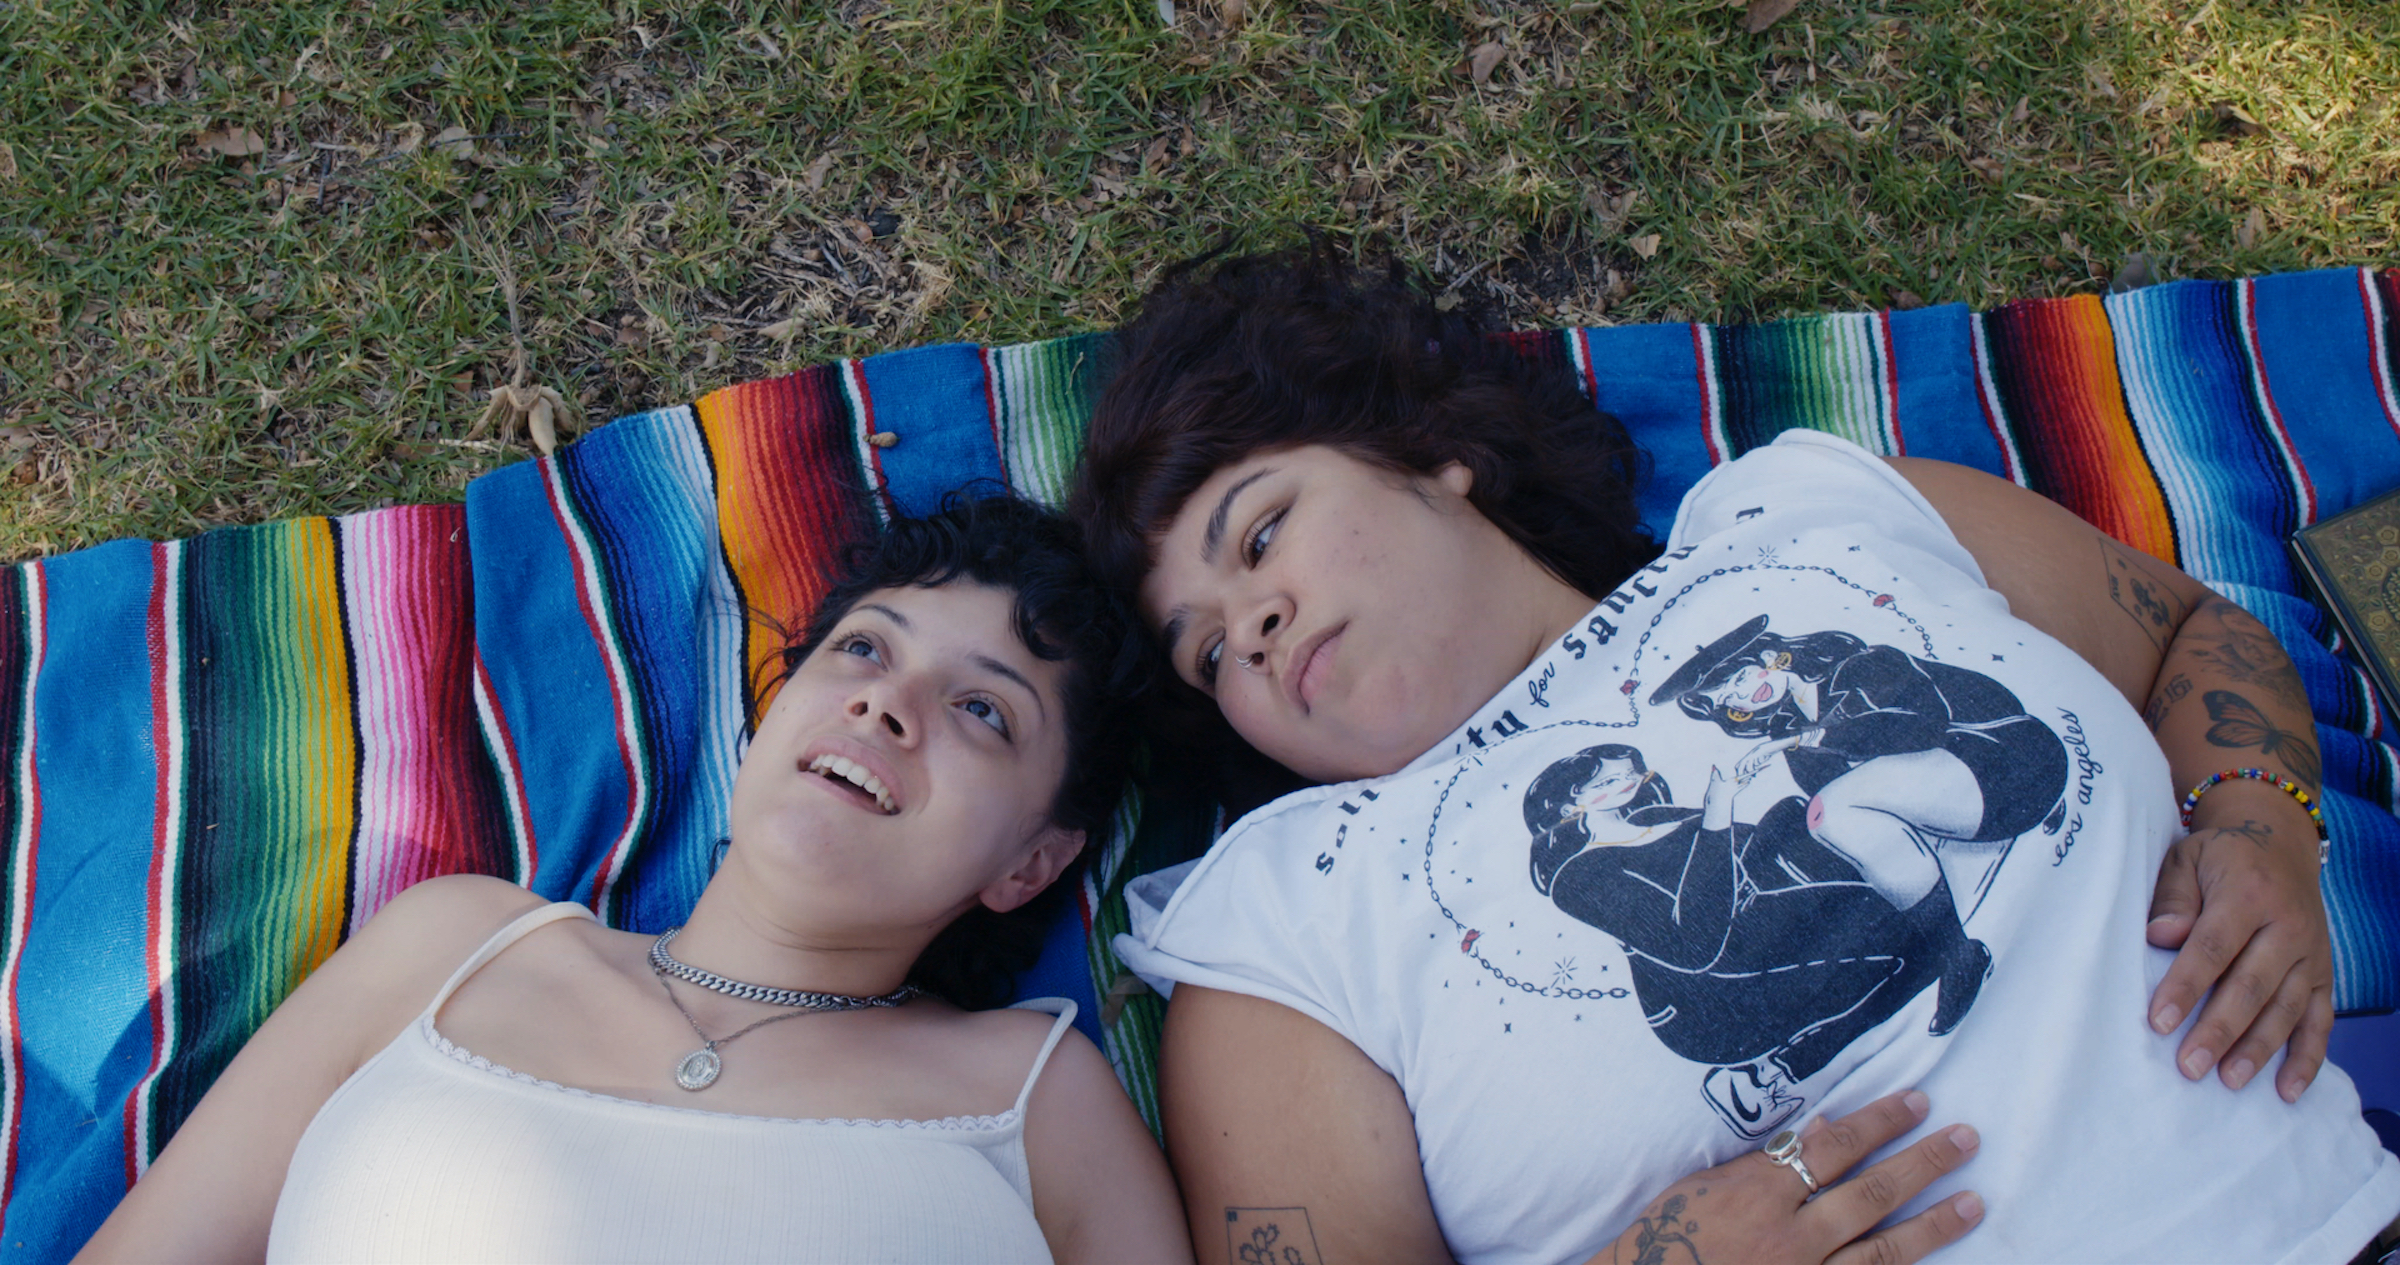 Doris Muñoz and Jacks Haupt lay on a multicolored blanket in the grass. (Courtesy of Disney)